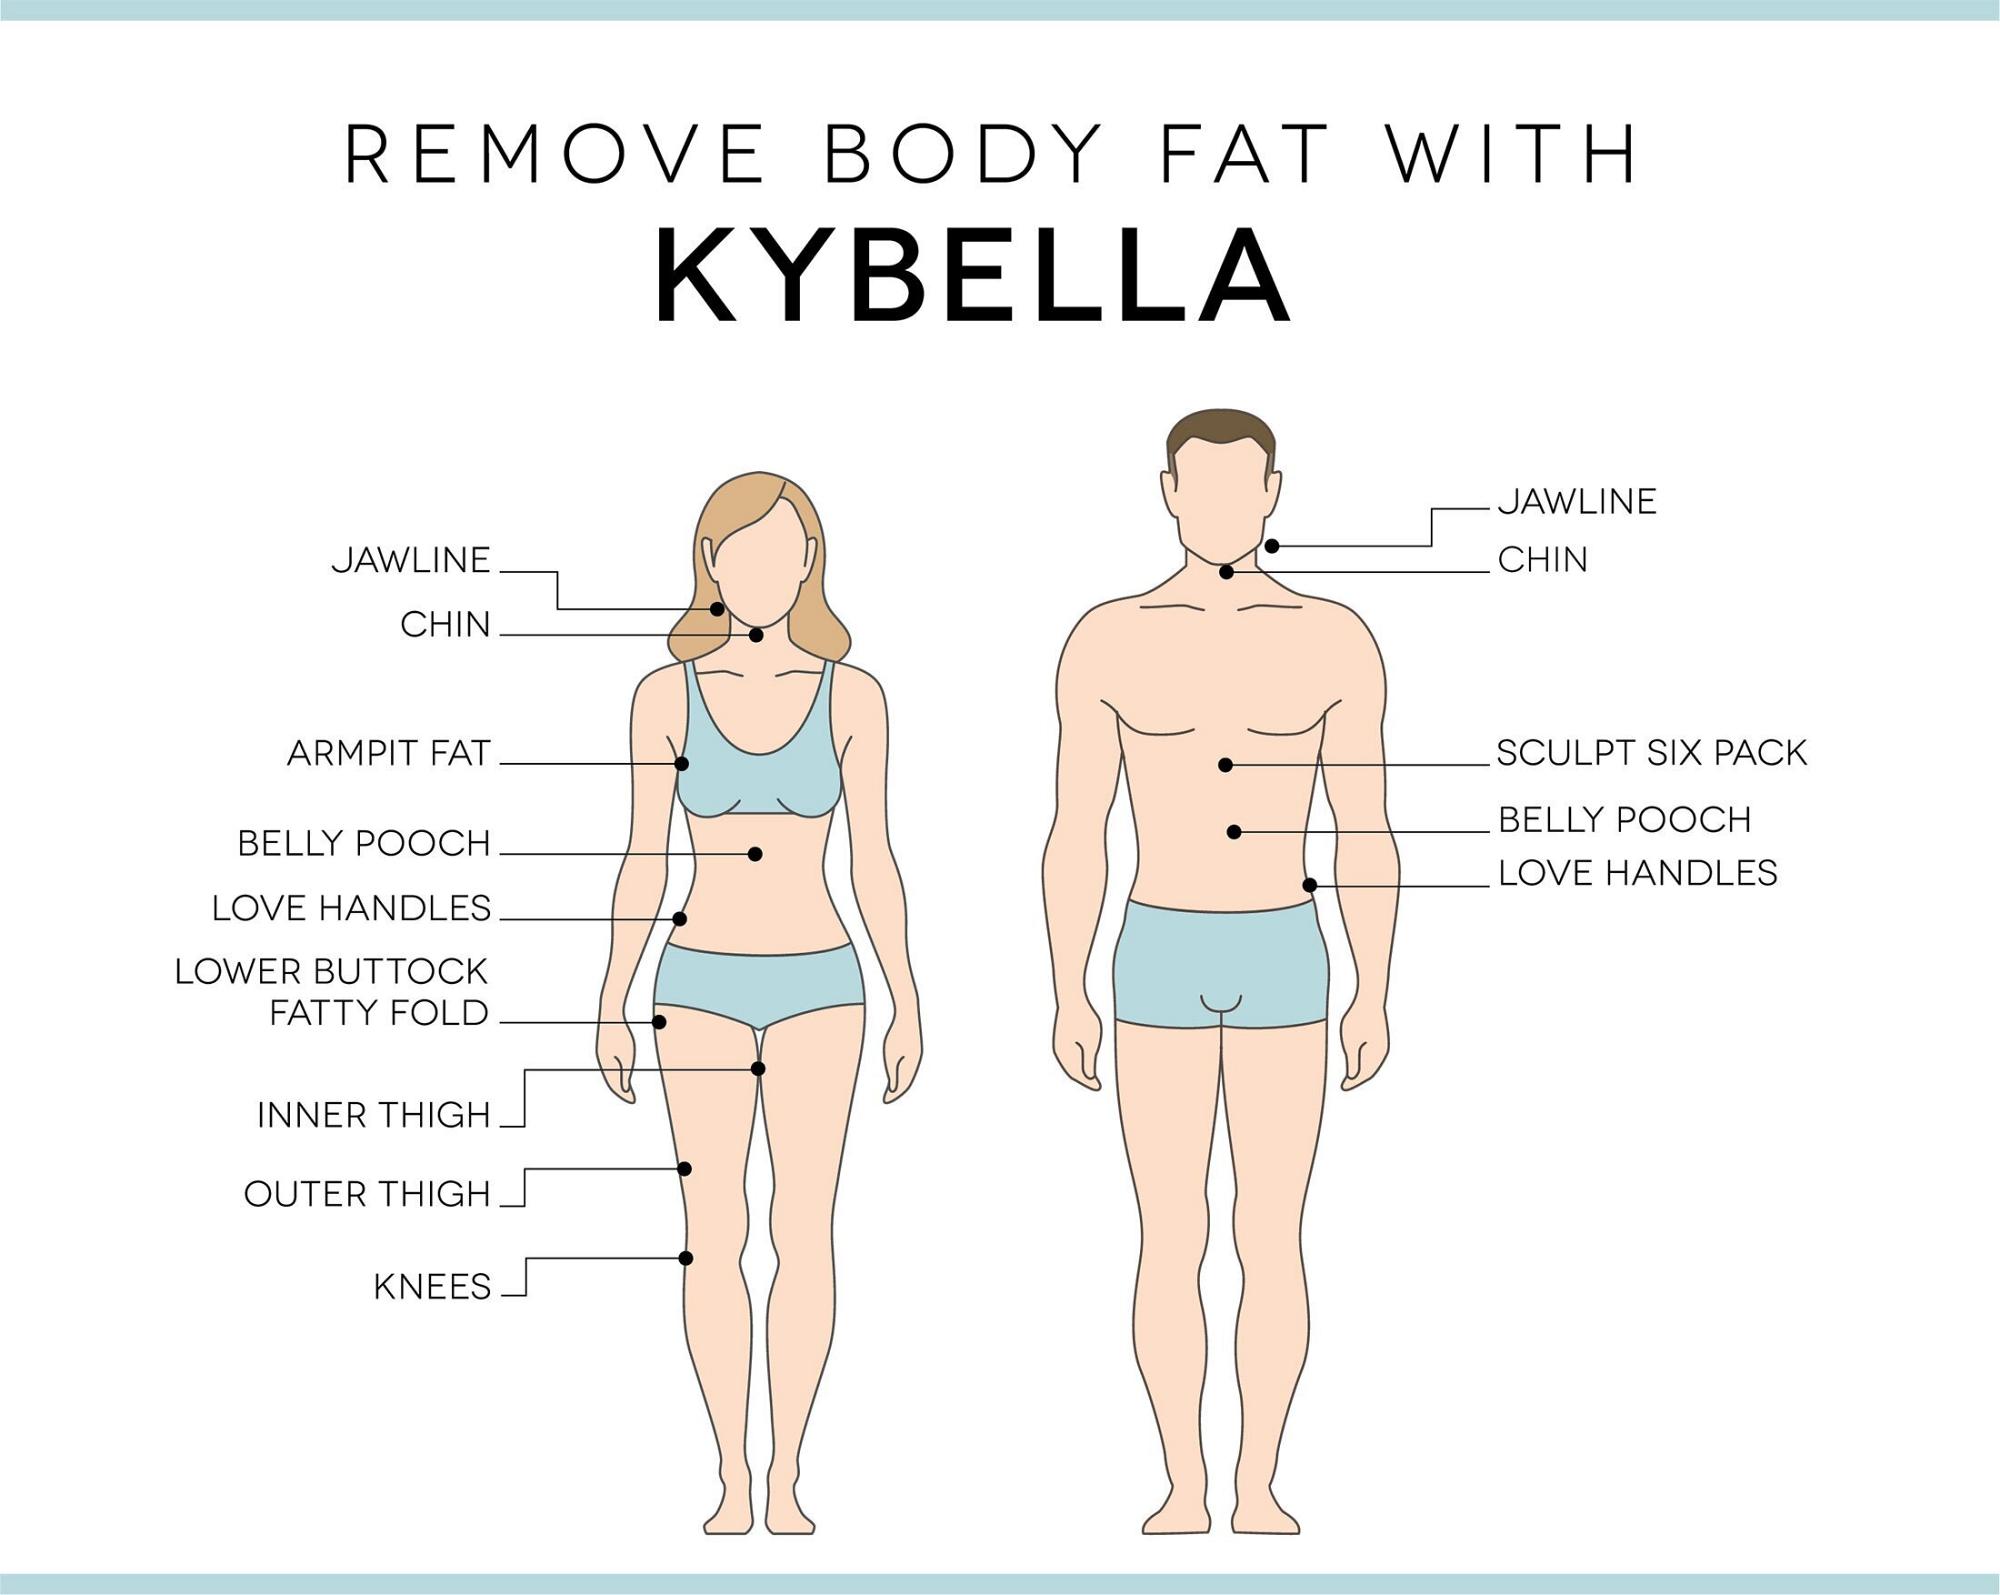 Kybella Treatment Areas - Jawline, Chin, Armpit Fat, Belly Pooch, Love Handles, Lower Buttock Fatty Fold, Inner Thigh, Outer Thigh, Knees